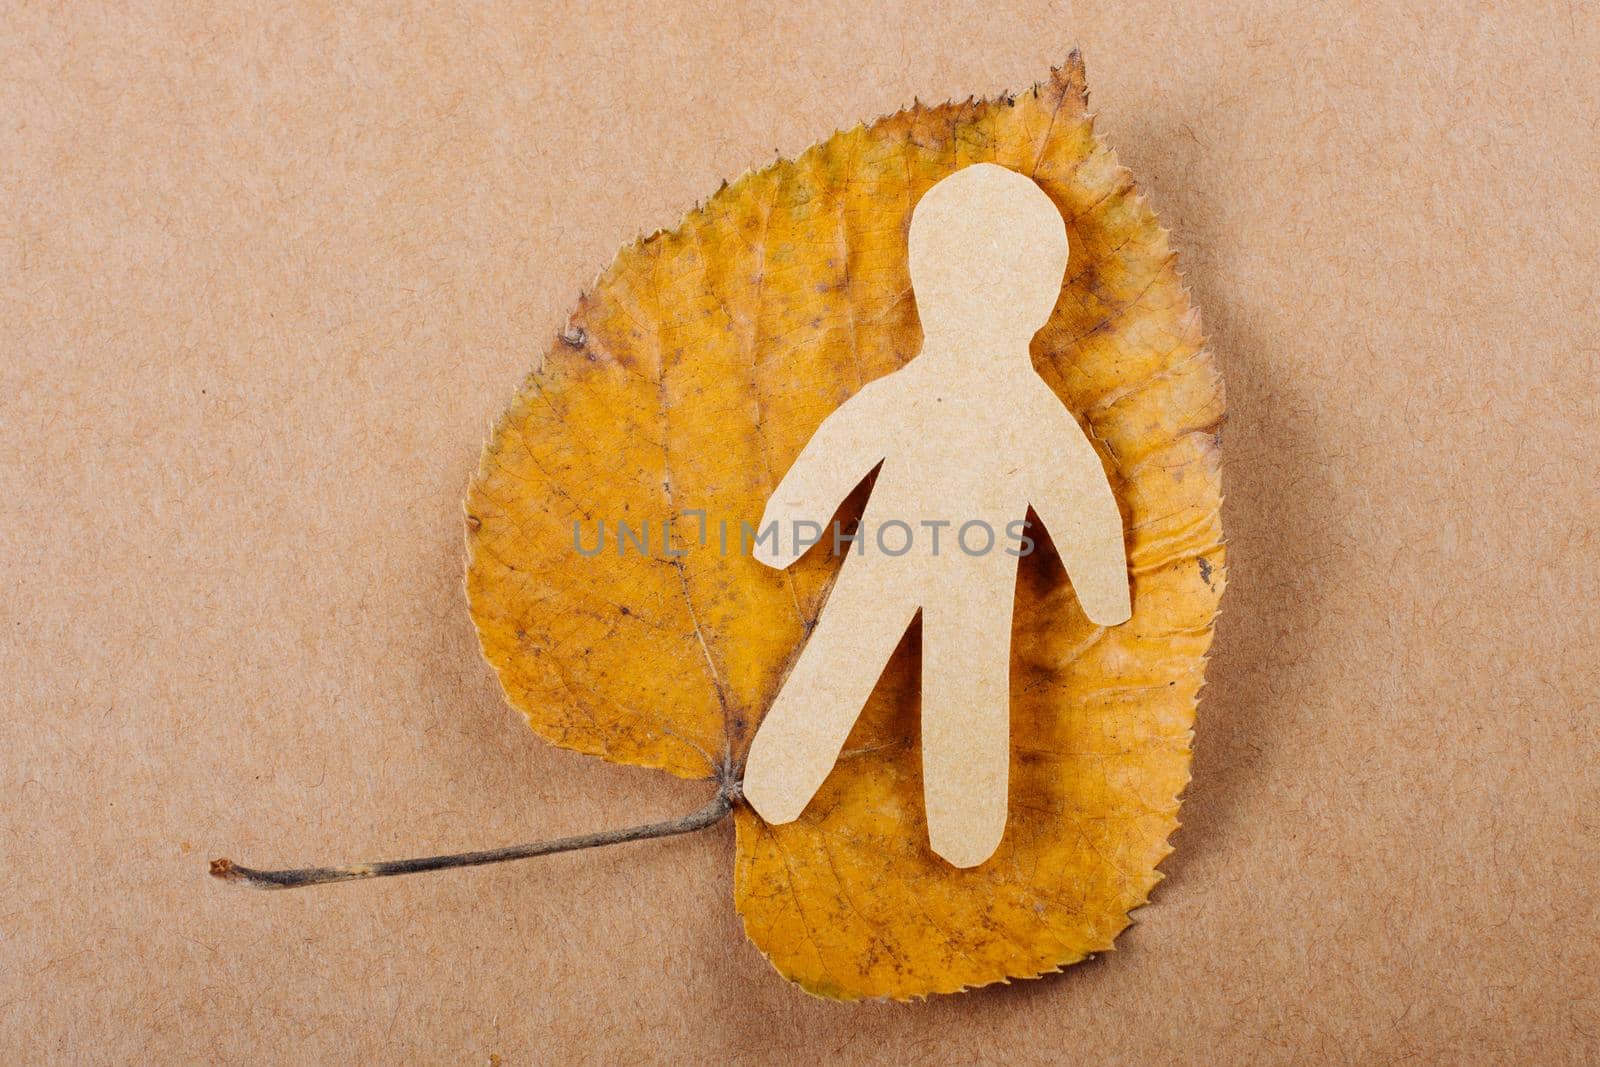 Paper man shape placed  on a dry leaf in view